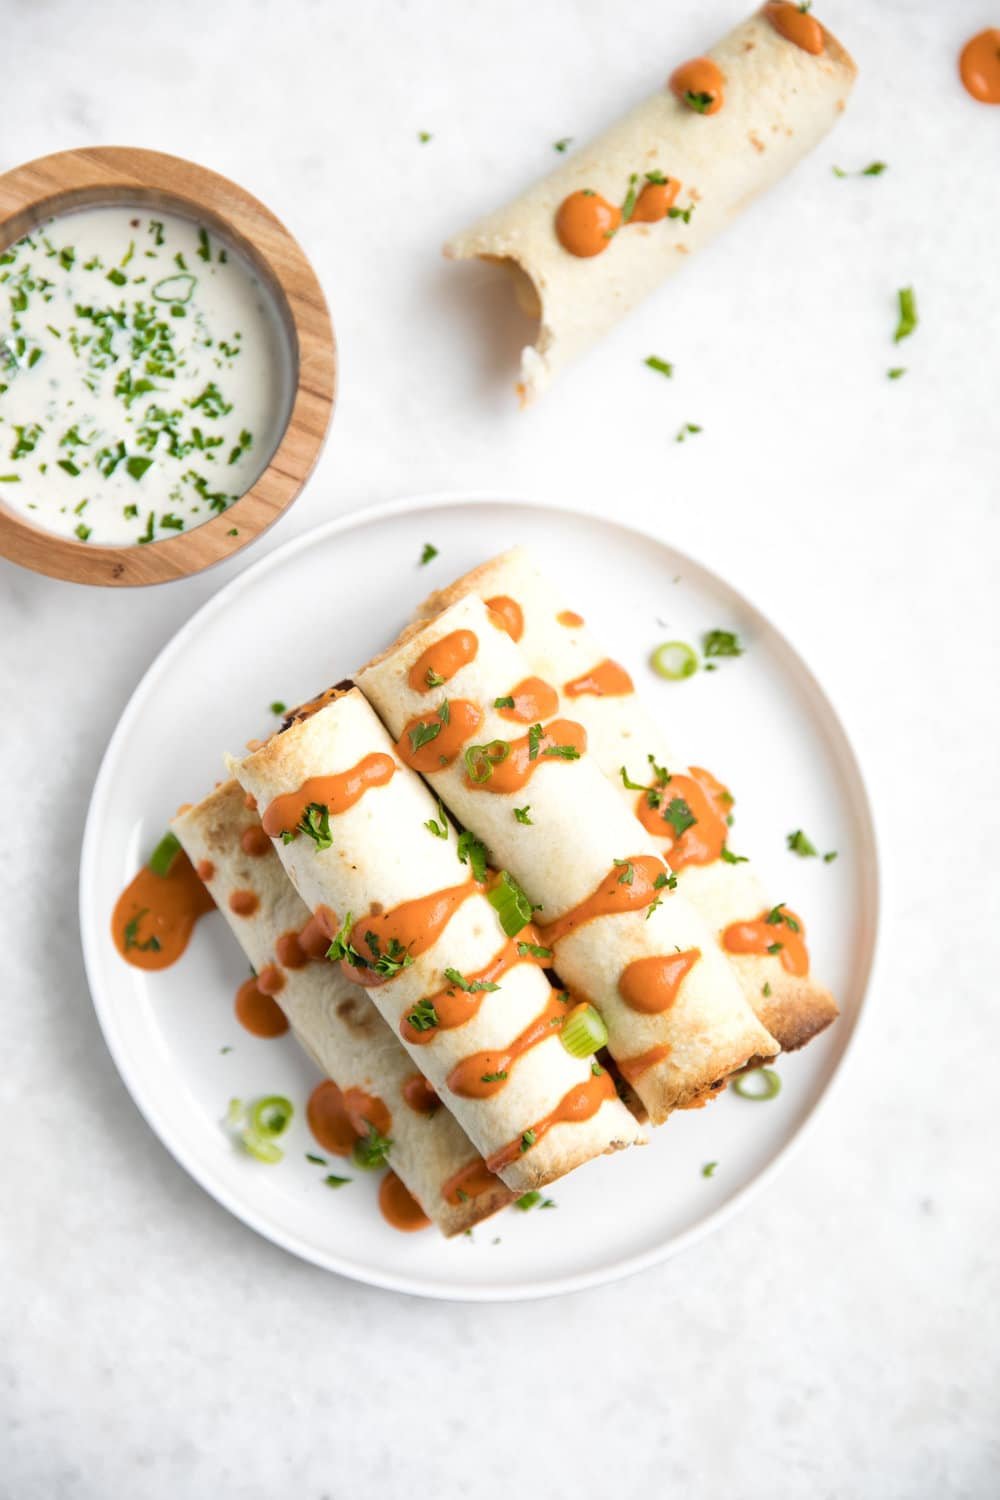 Most popular recipe posts from The Forked Spoon in 2017- Buffalo Chicken and Cauliflower Taquitos